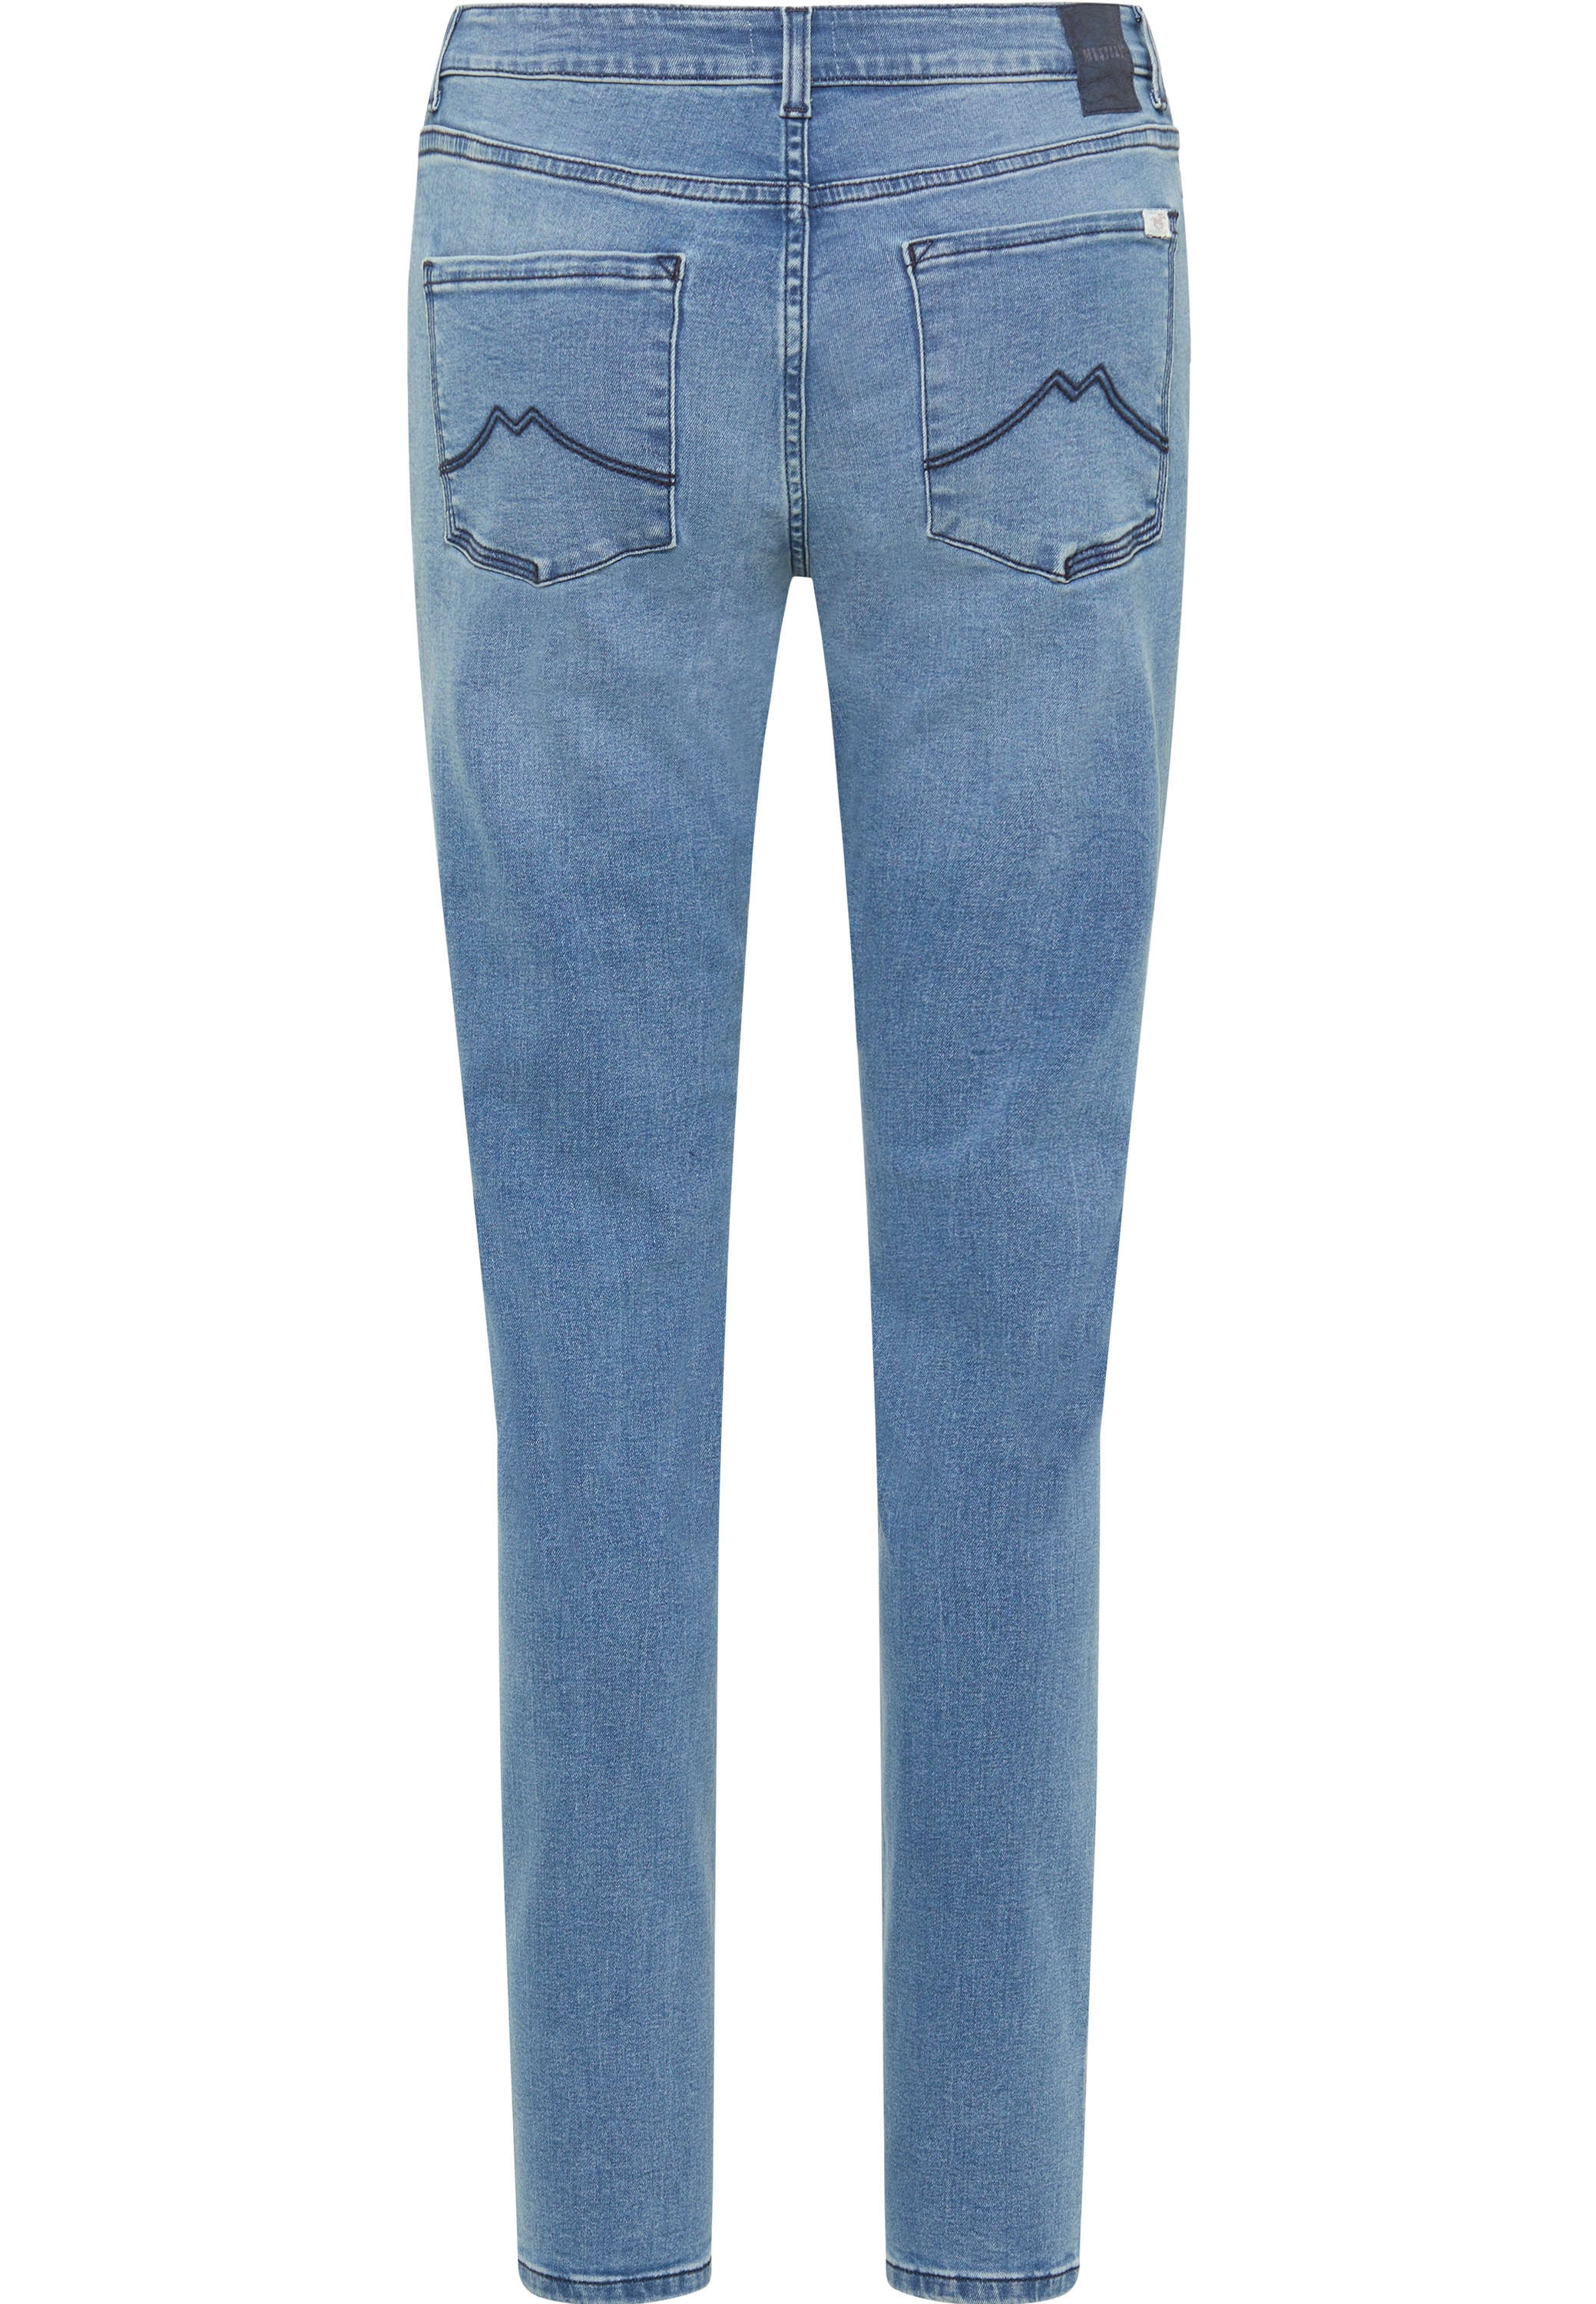 MUSTANG 5-Pocket-Hose »Style Crosby Relaxed Slim«